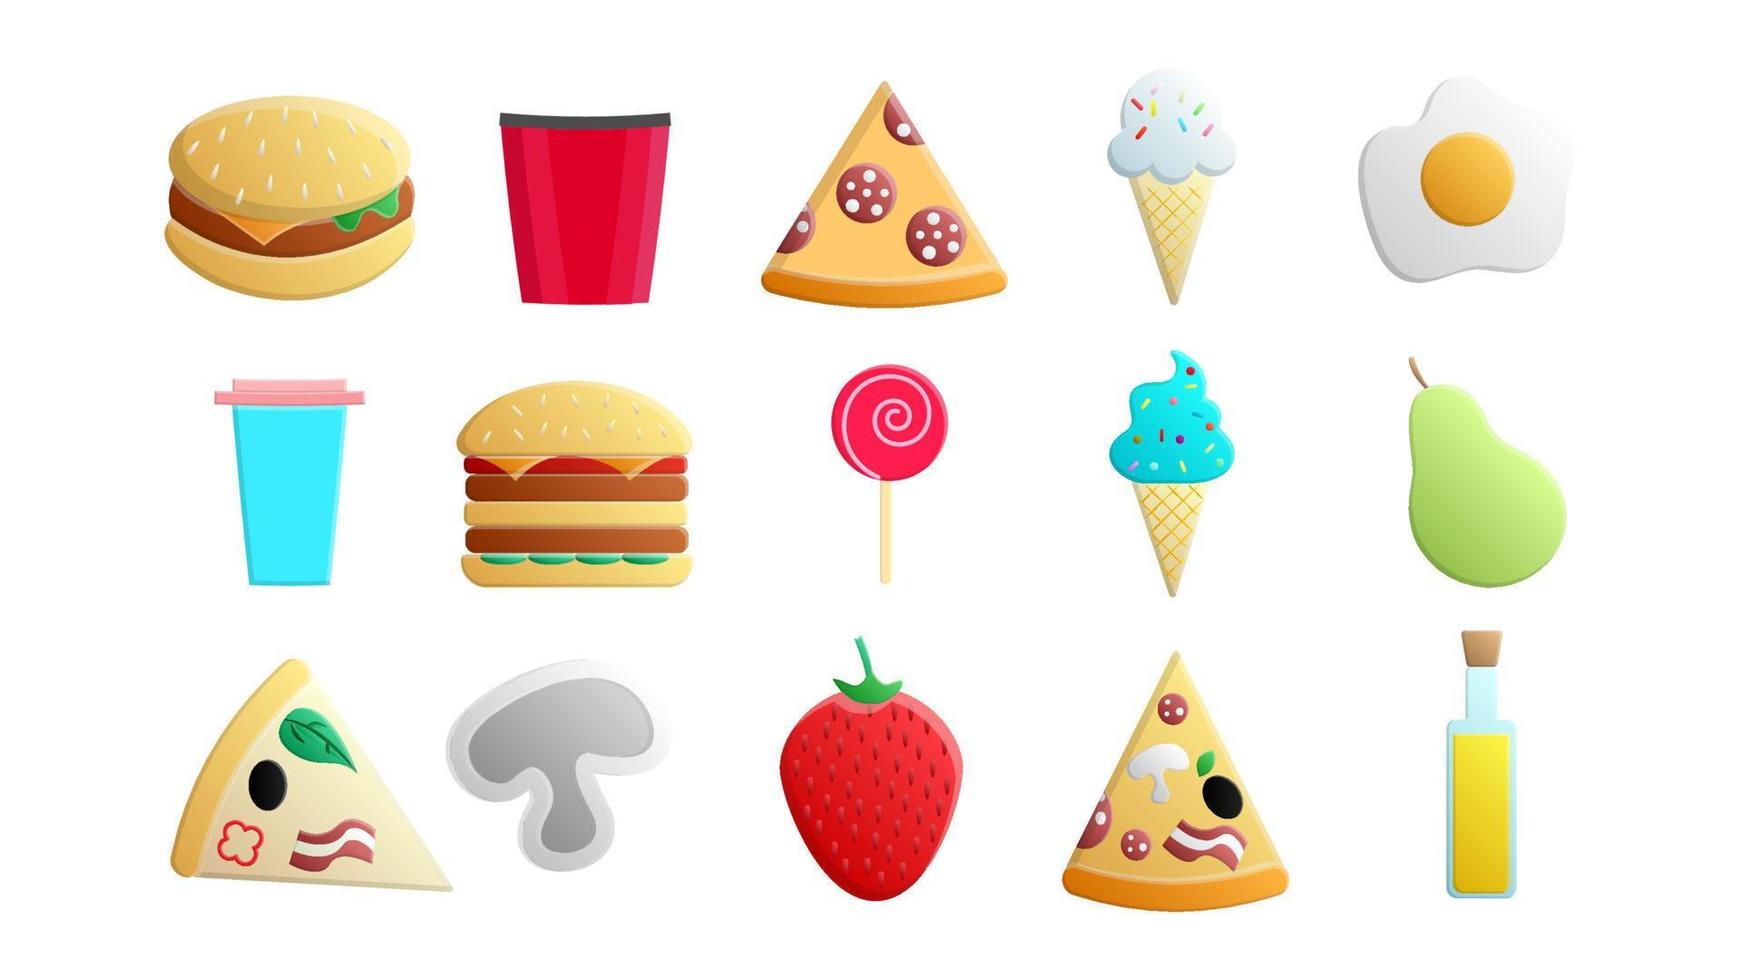 Set of 15 icons of items of delicious food and snacks for a cafe bar restaurant on a white background ice cream, burger, pizza, popcorn, drink, pear, strawberry vector